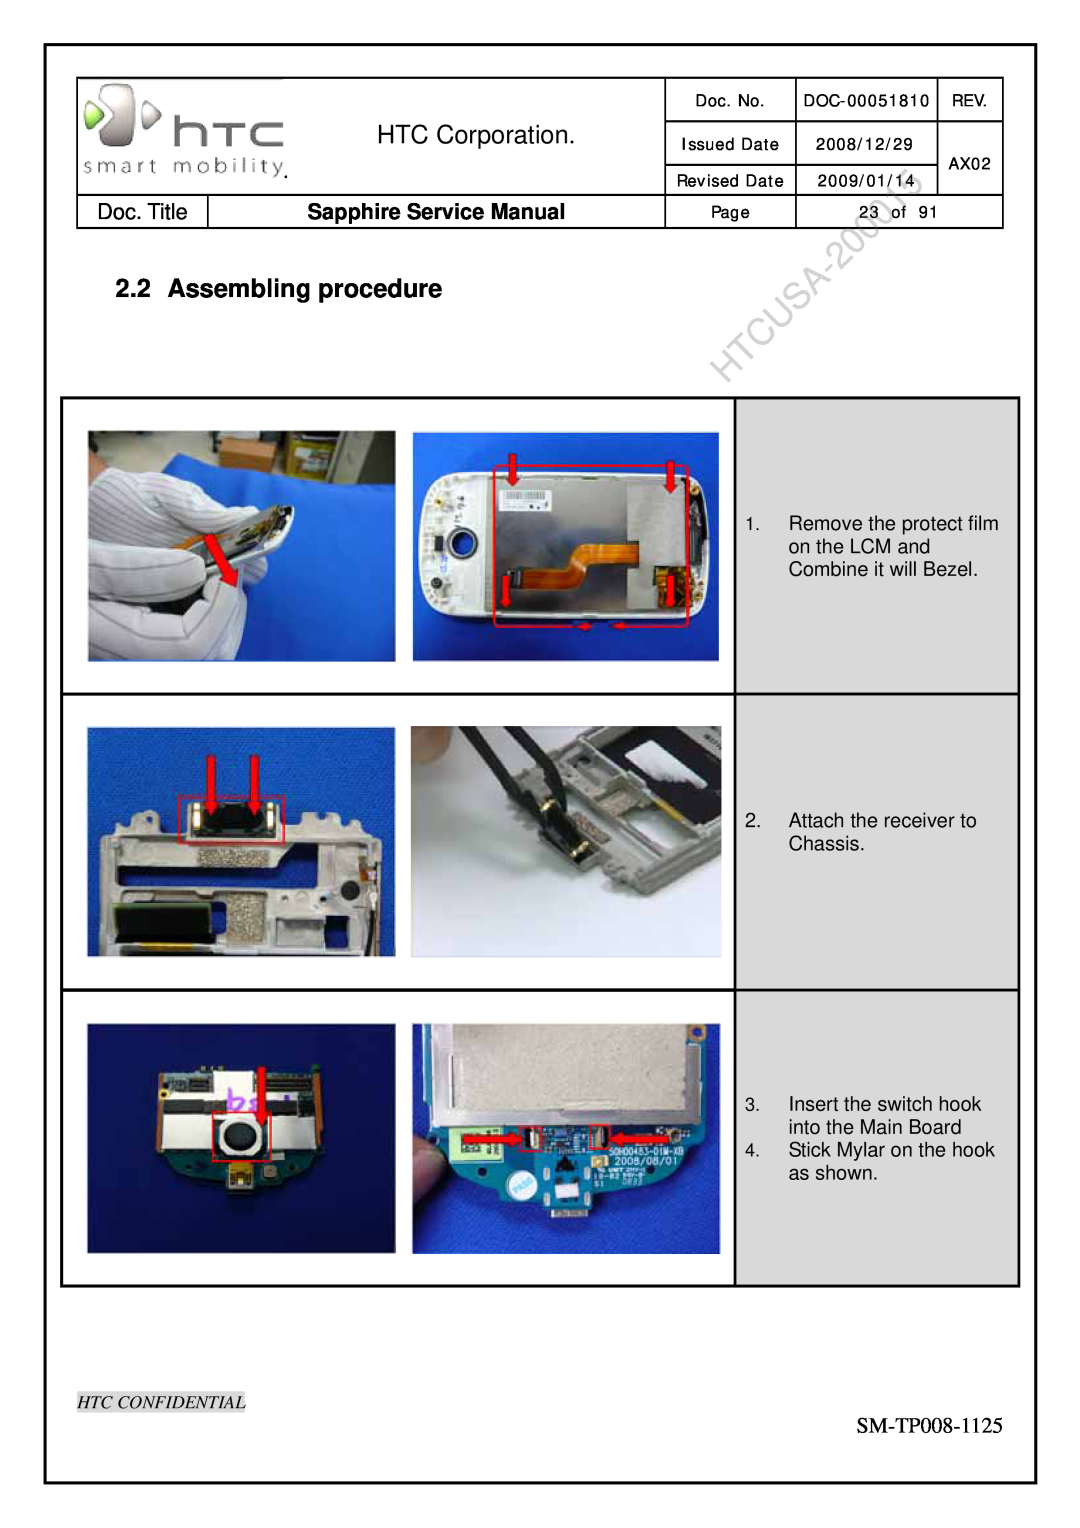 HTC SM-TP008-1125 Assembling procedure, HTC Corporation, Sapphire Service Manual, Attach the receiver to Chassis, Doc. No 